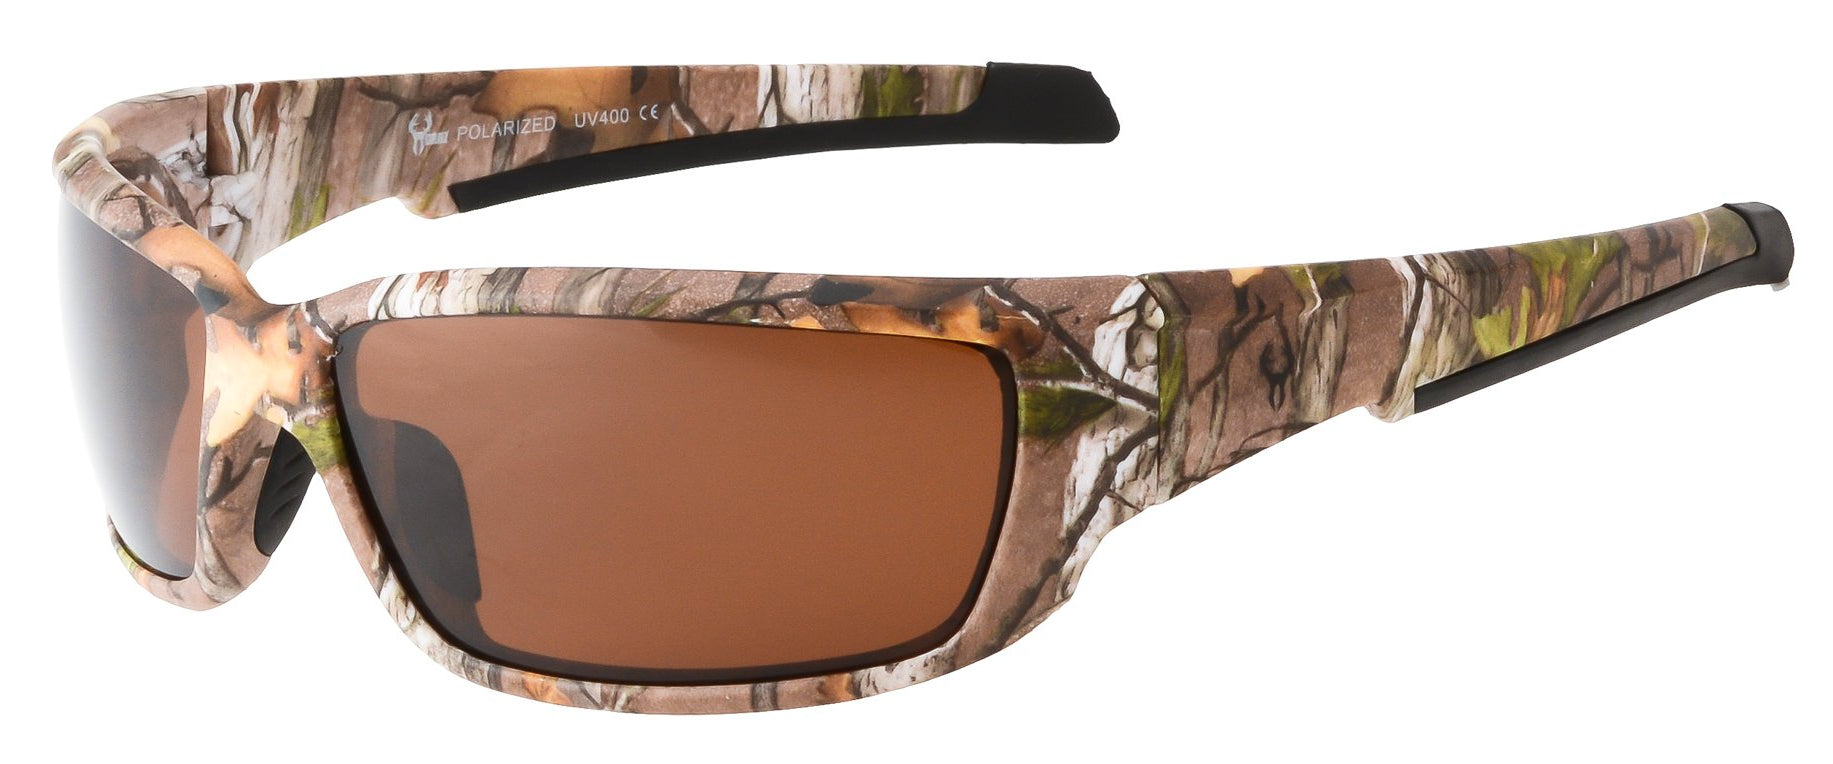 Main image: Hornz Brown Forest Camouflage Polarized Sunglasses for Men Full Frame Strong Arms & Free Matching Microfiber Pouch – Brown Camo Frame – Amber Lens